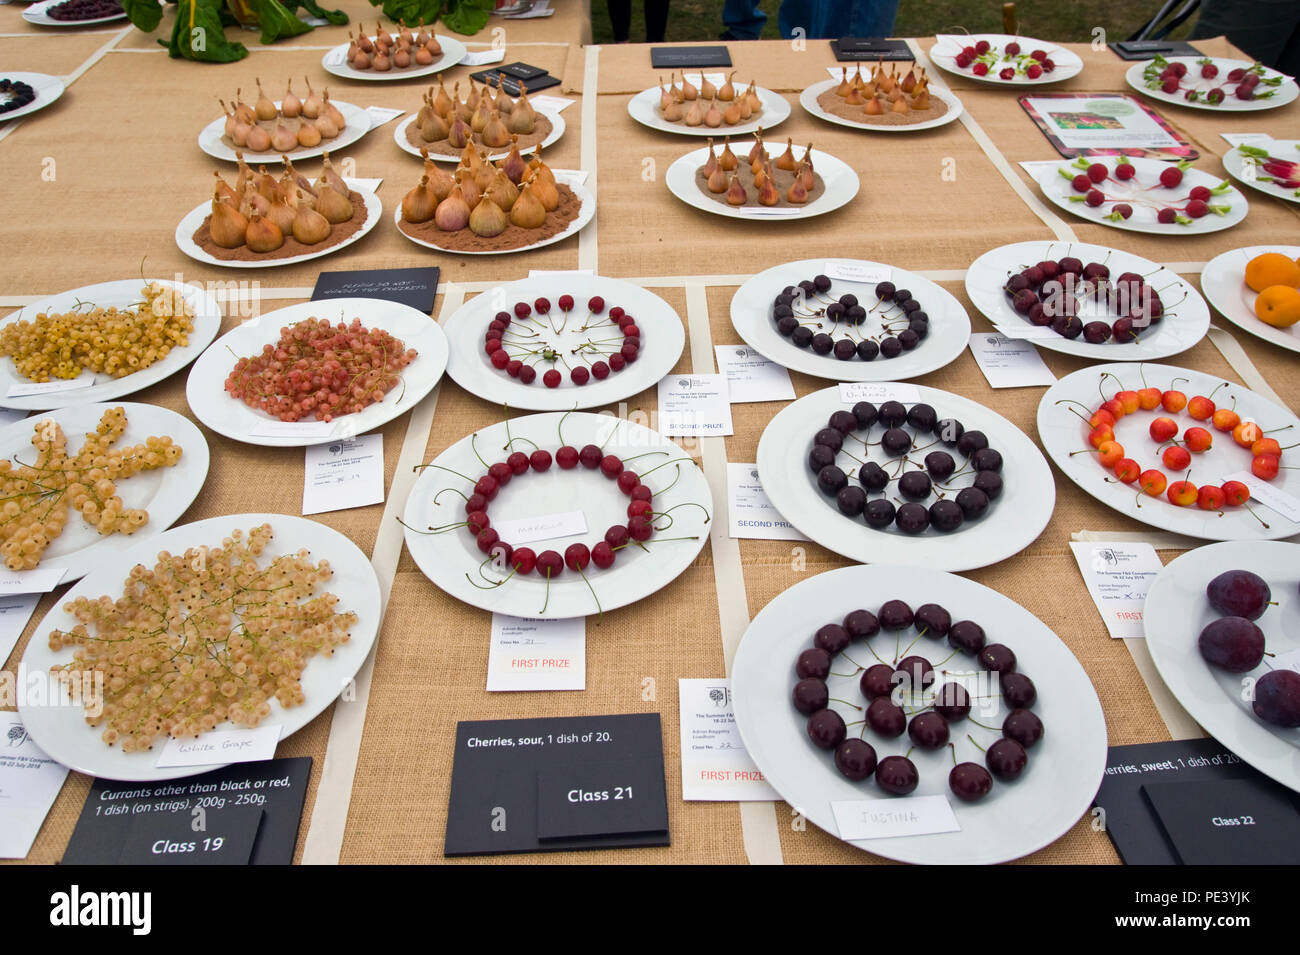 Prizewinning fruit & shallots on display at RHS Tatton Park flower show Cheshire England UK Stock Photo